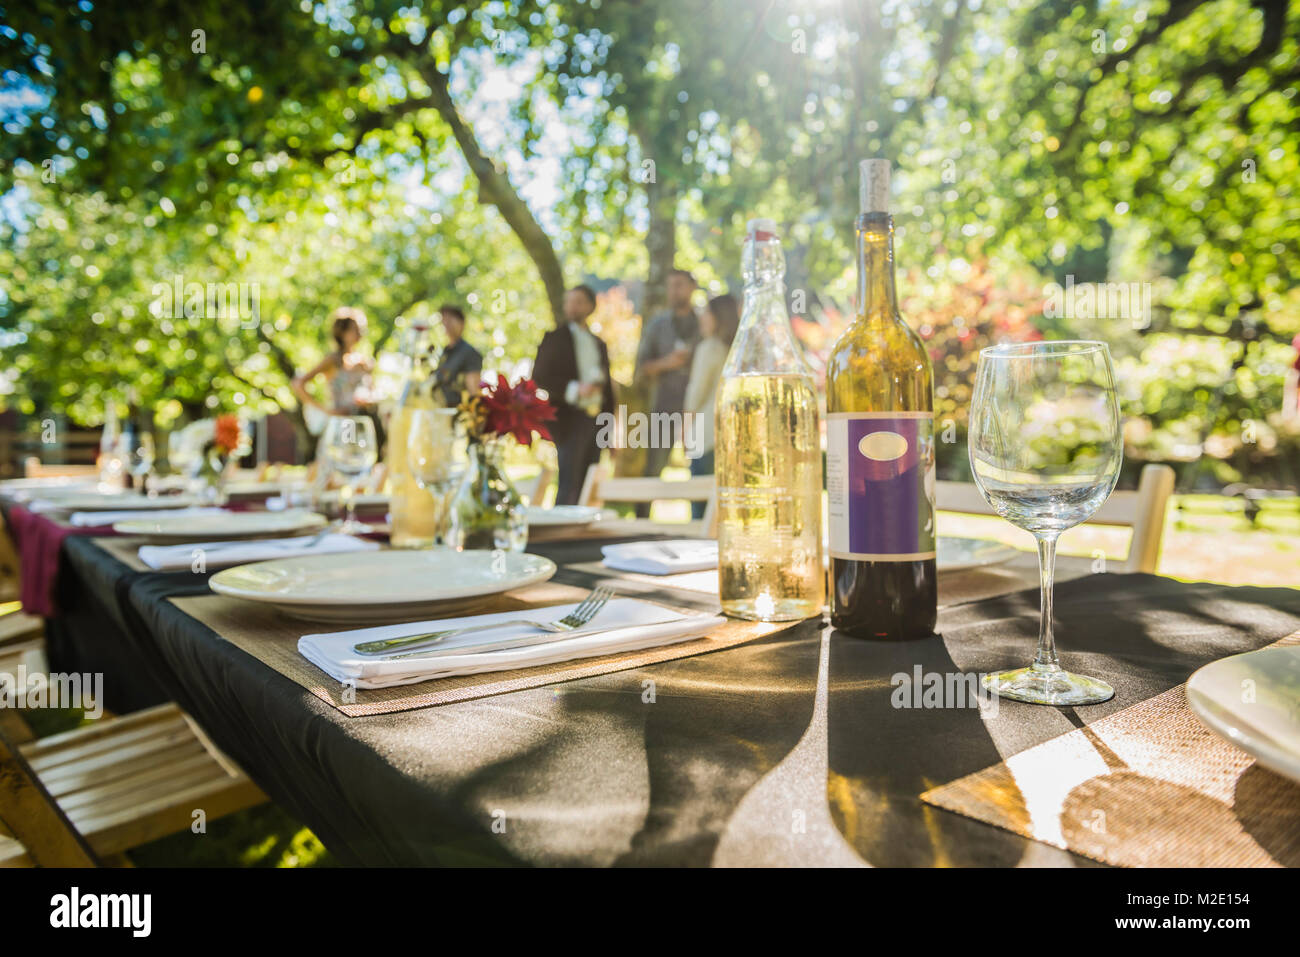 Wine bottles on table at party outdoors Stock Photo